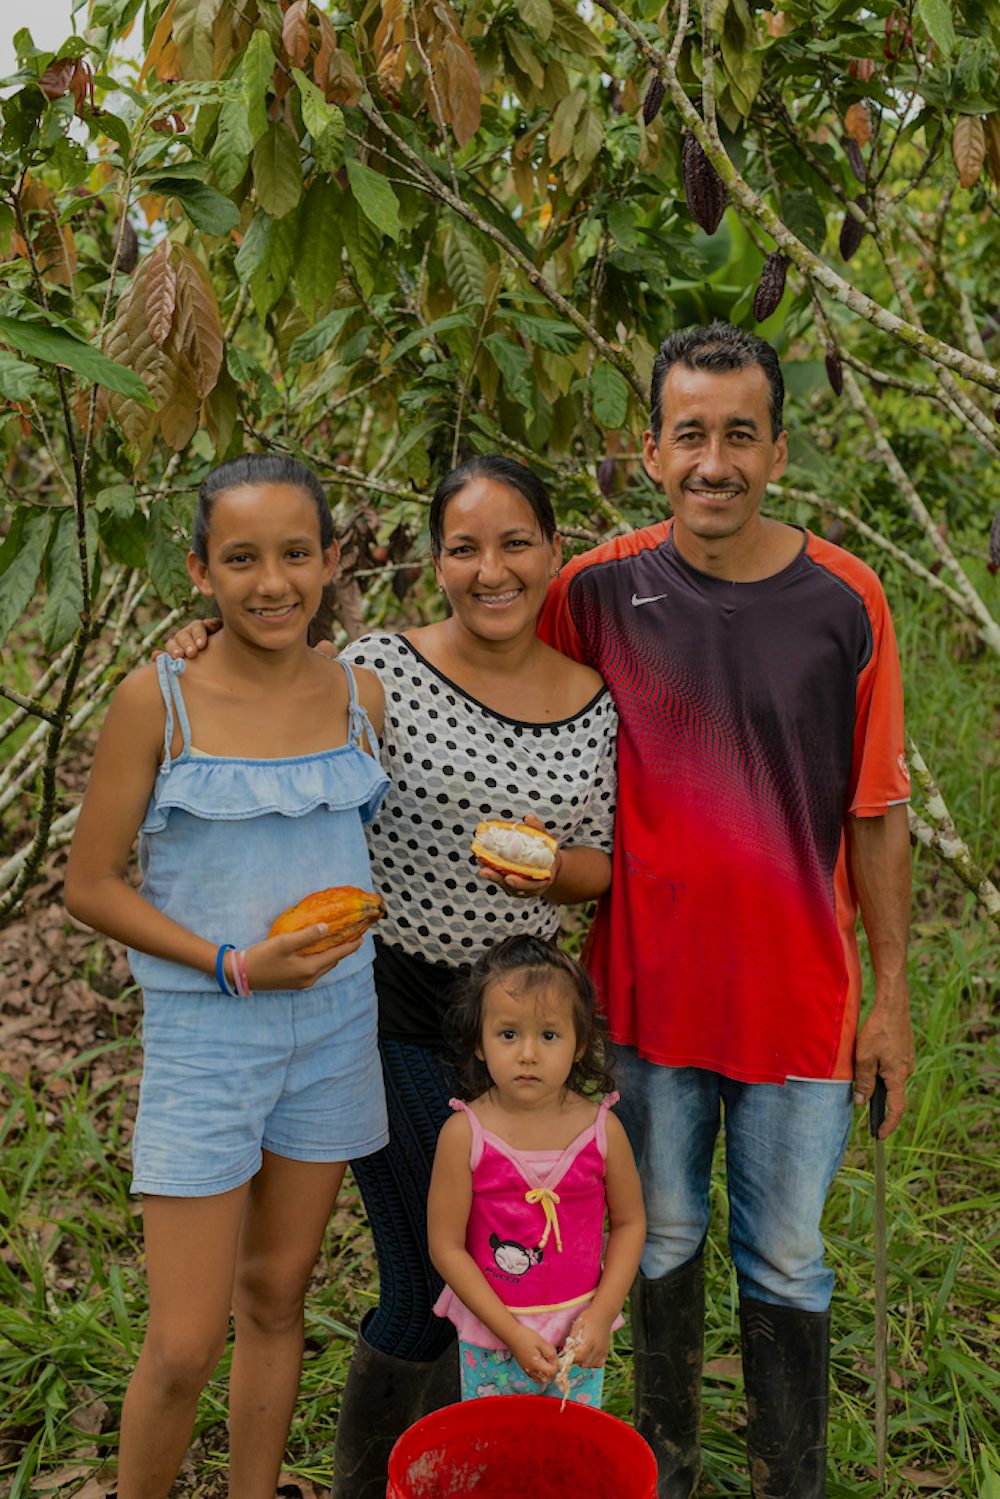 A family portrait in the chocolate grove of a man with his arm around his wife and older daughter, who are holding cacao pods, with the youngest daughter standing in front.